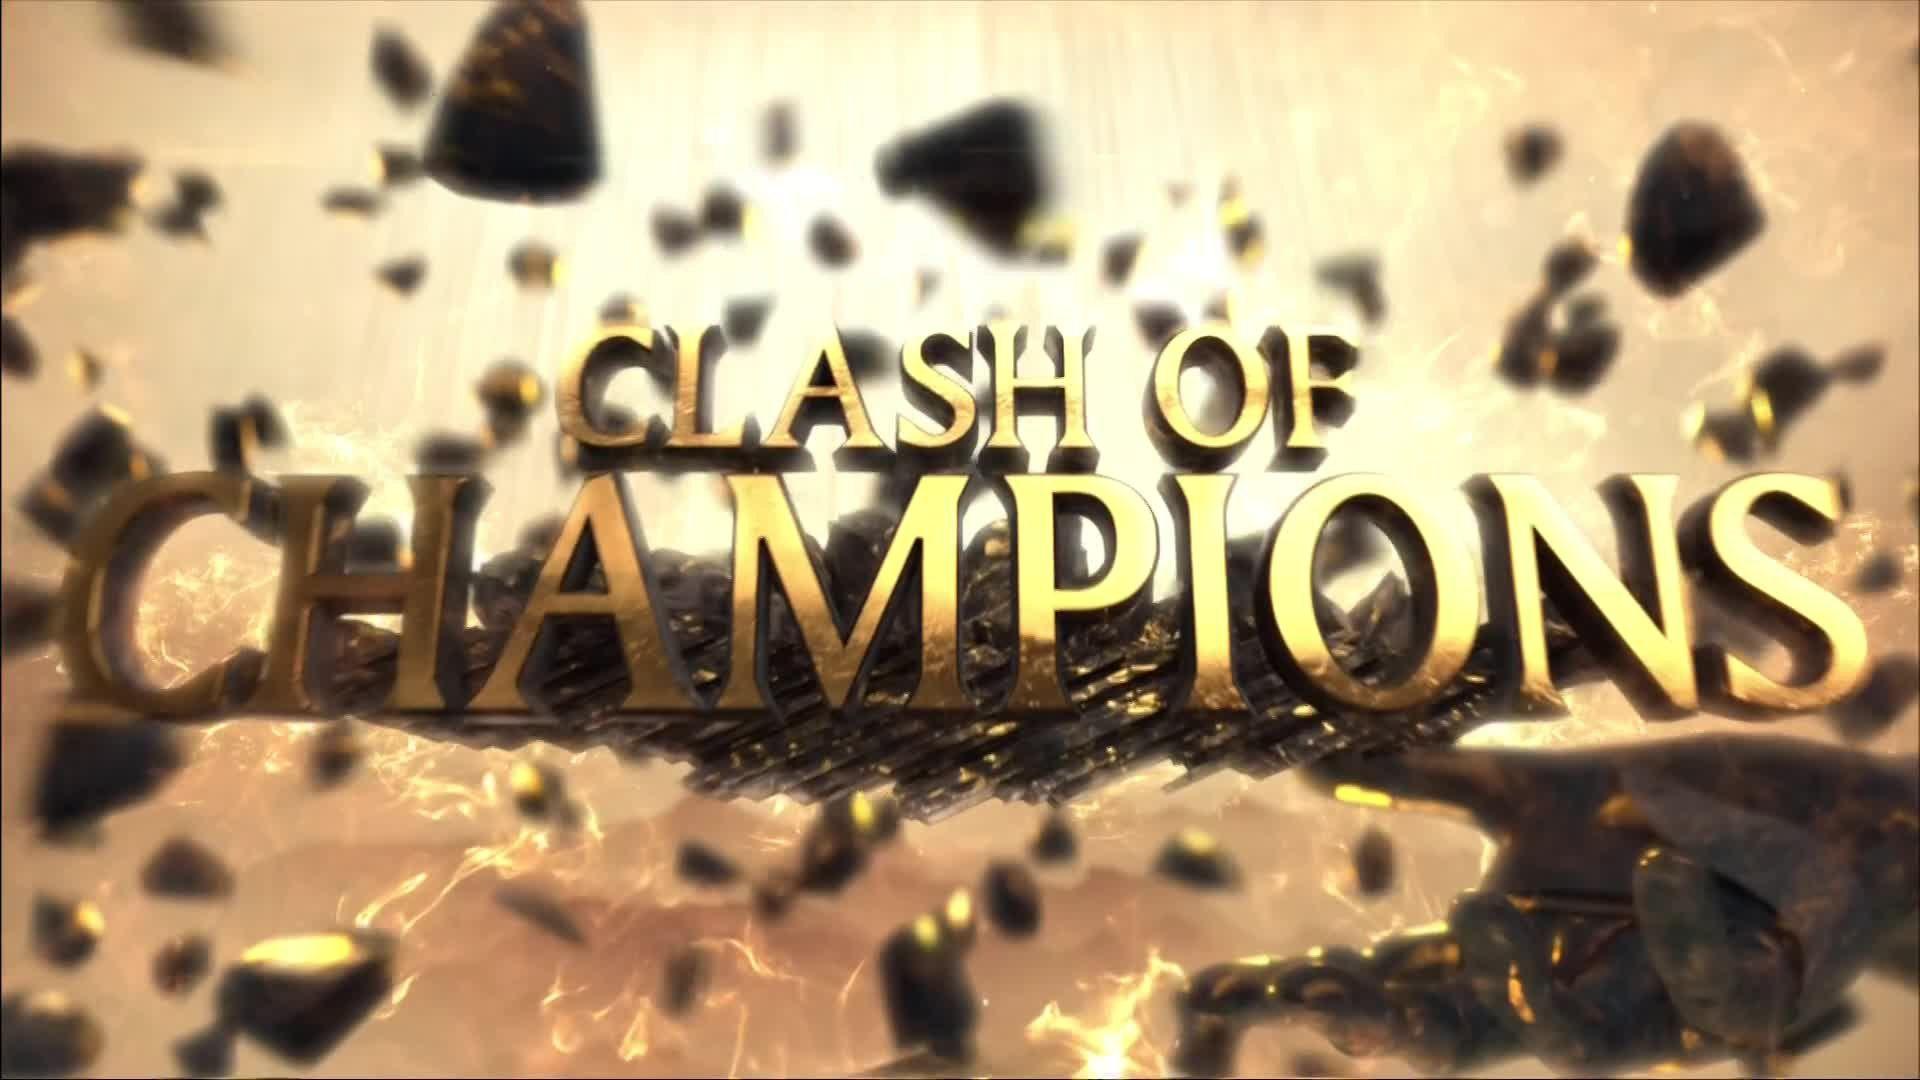 WWE Clash of Champions 2019 live stream: How to watch WWE